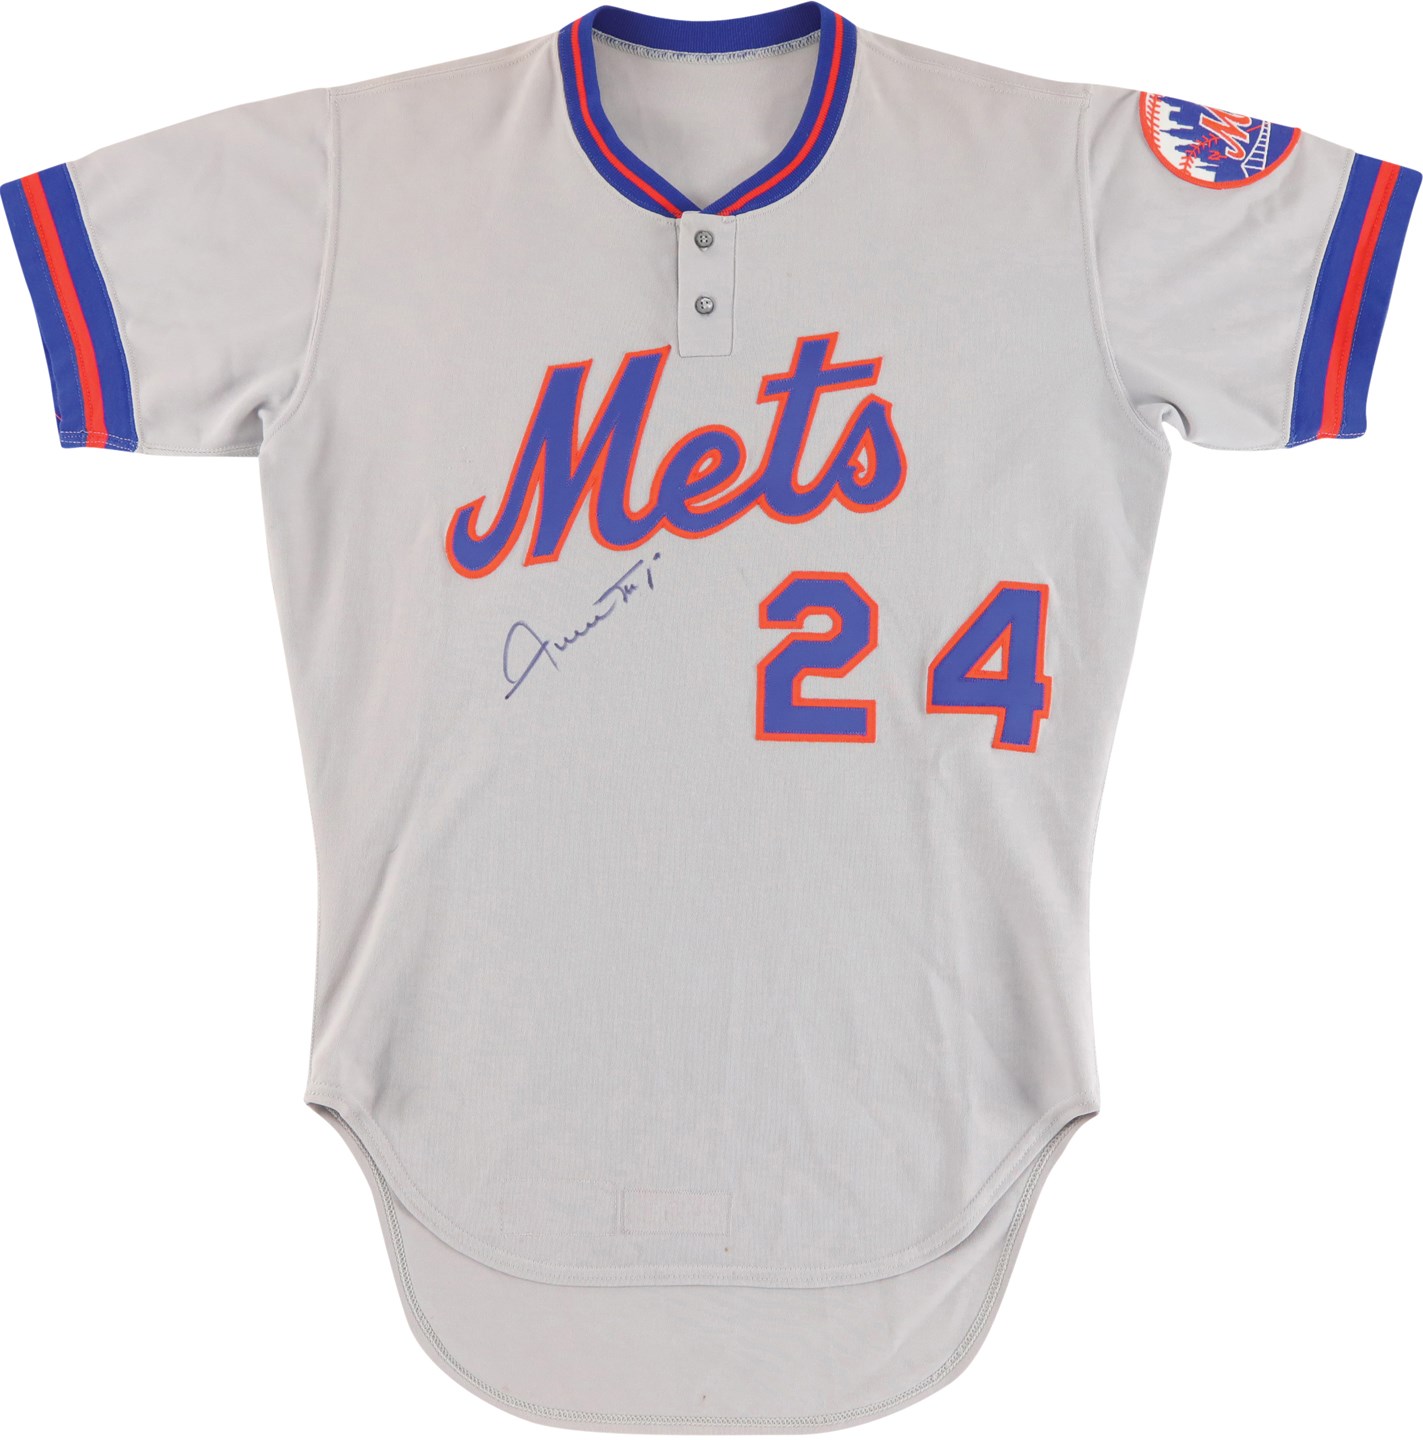 Baseball Equipment - 1978 Willie Mays New York Mets Signed Game Worn Coaches Jersey